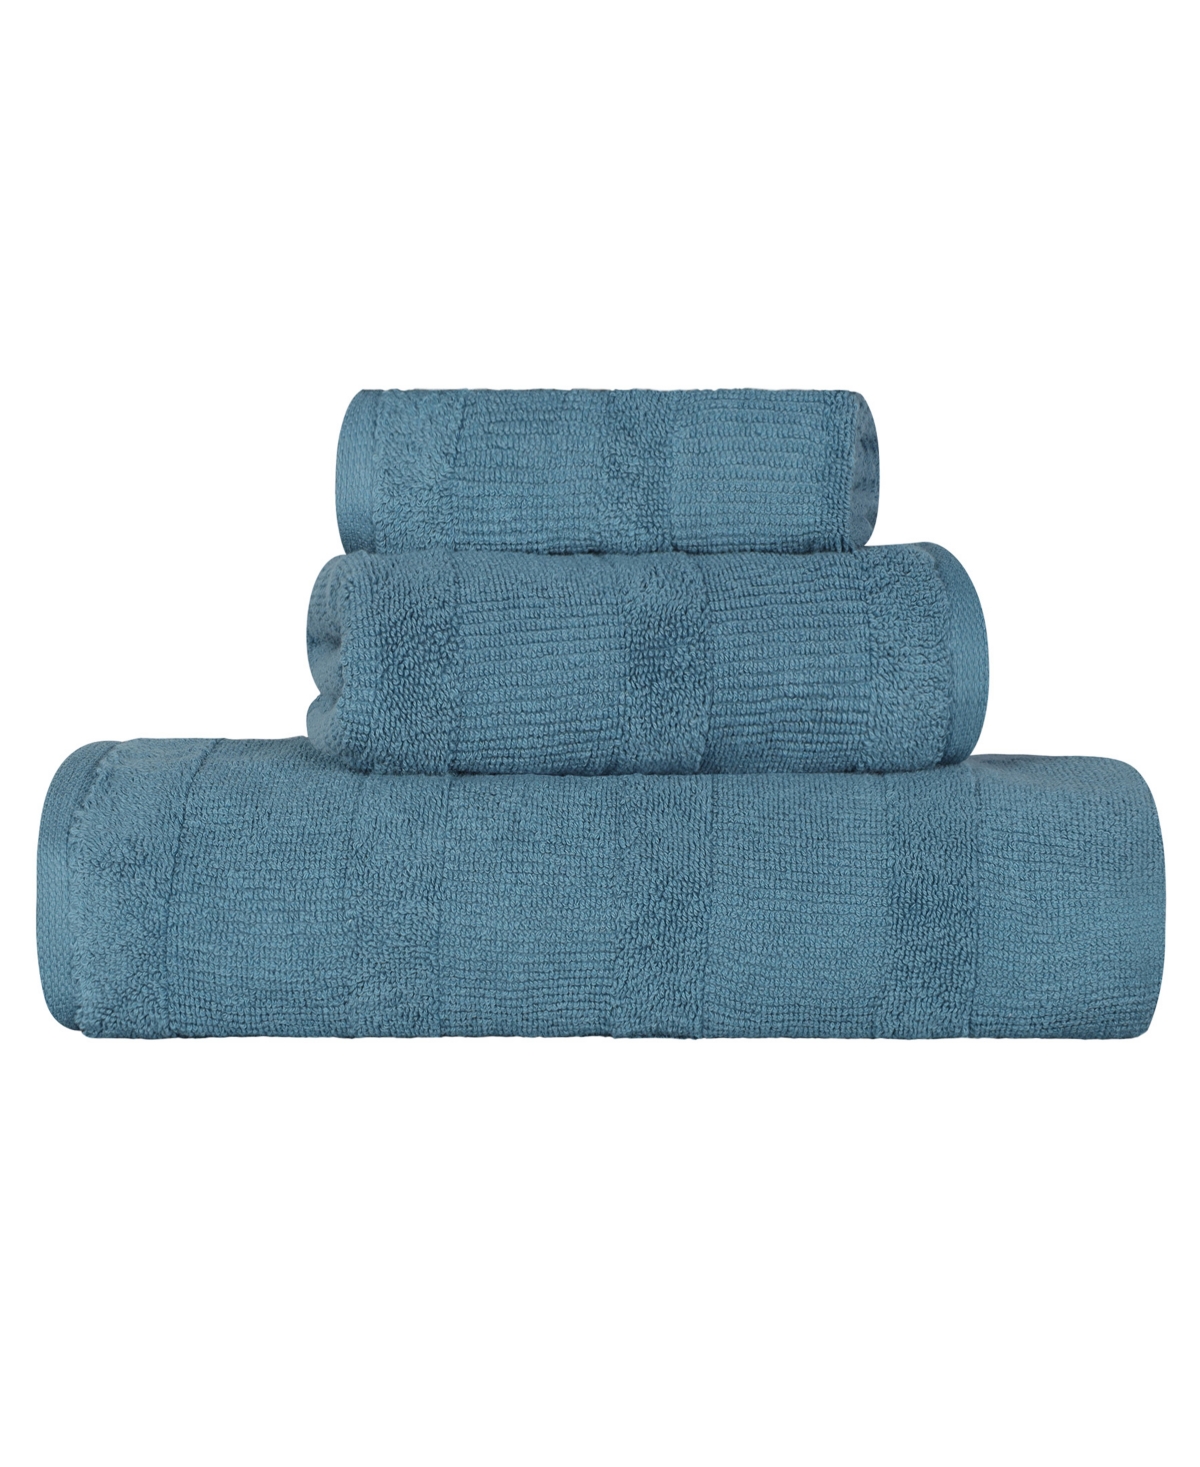 Superior Roma Ribbed Turkish Cotton Quick-dry Solid Assorted Highly Absorbent Towel 3 Piece Set In Denim Blue